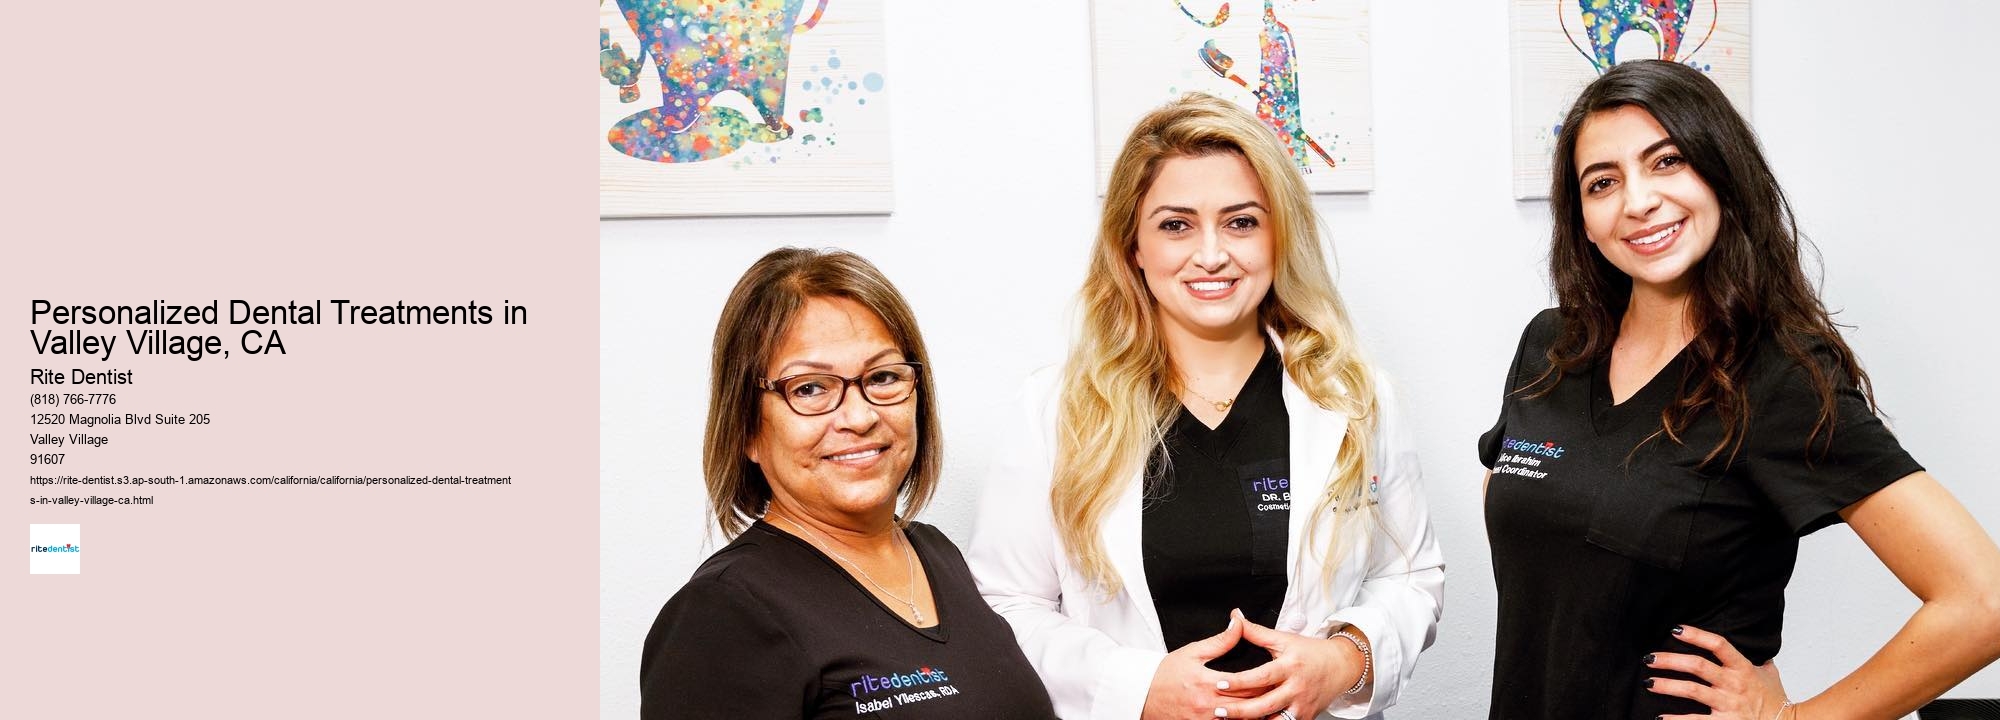 Personalized Dental Treatments in Valley Village, CA